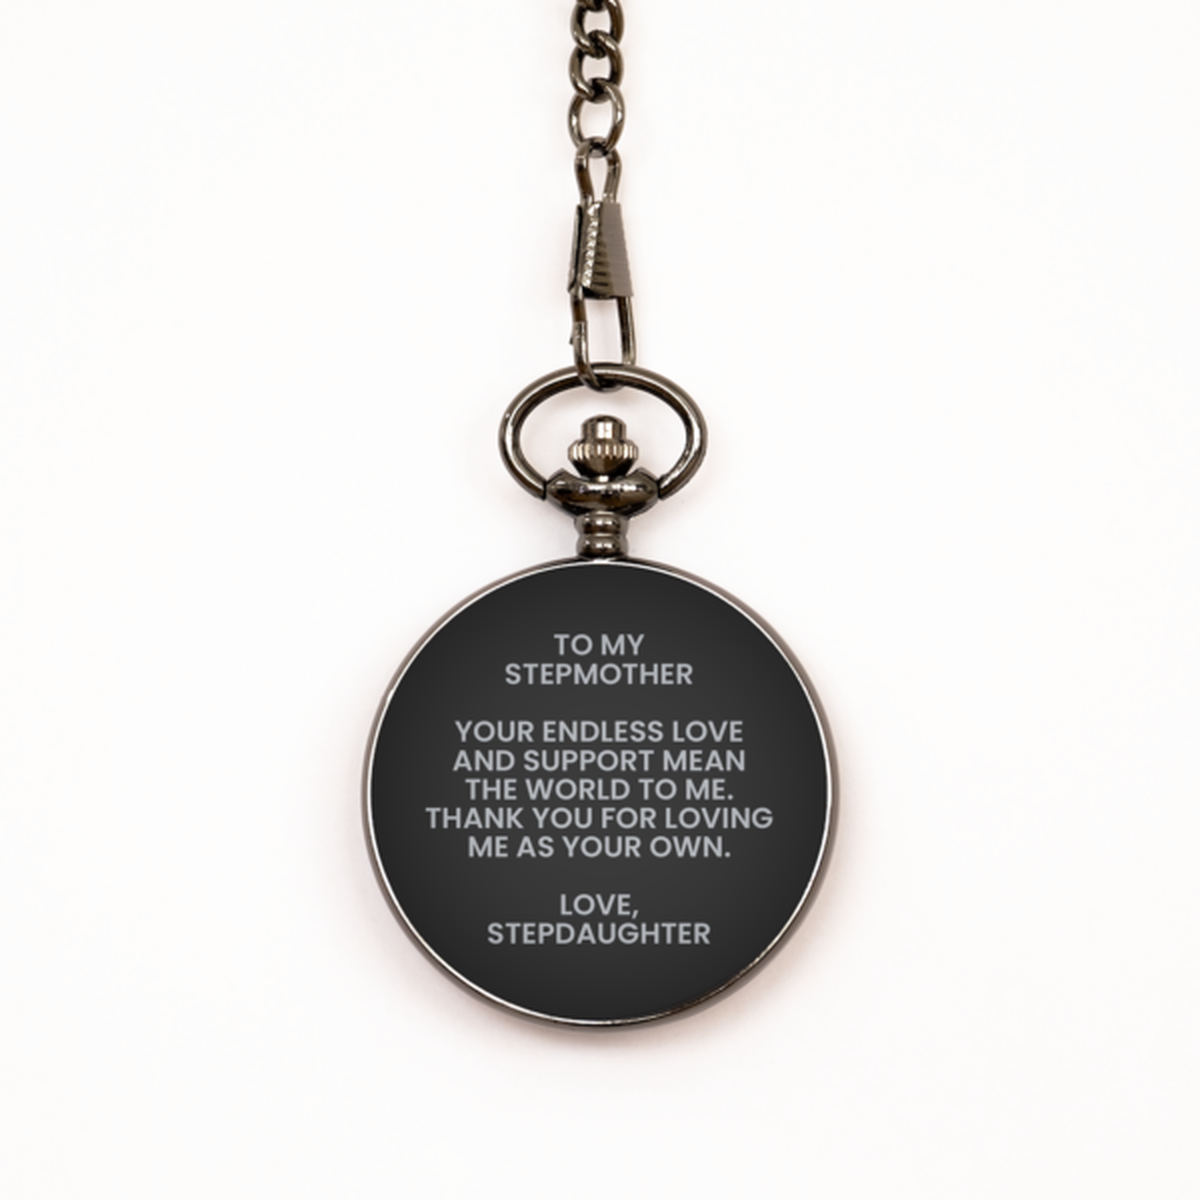 To My Stepmother   Black Pocket Watch, Your Endless Love, Valentines Gifts For Stepmother From Stepdaughter, Birthday Gifts For Women